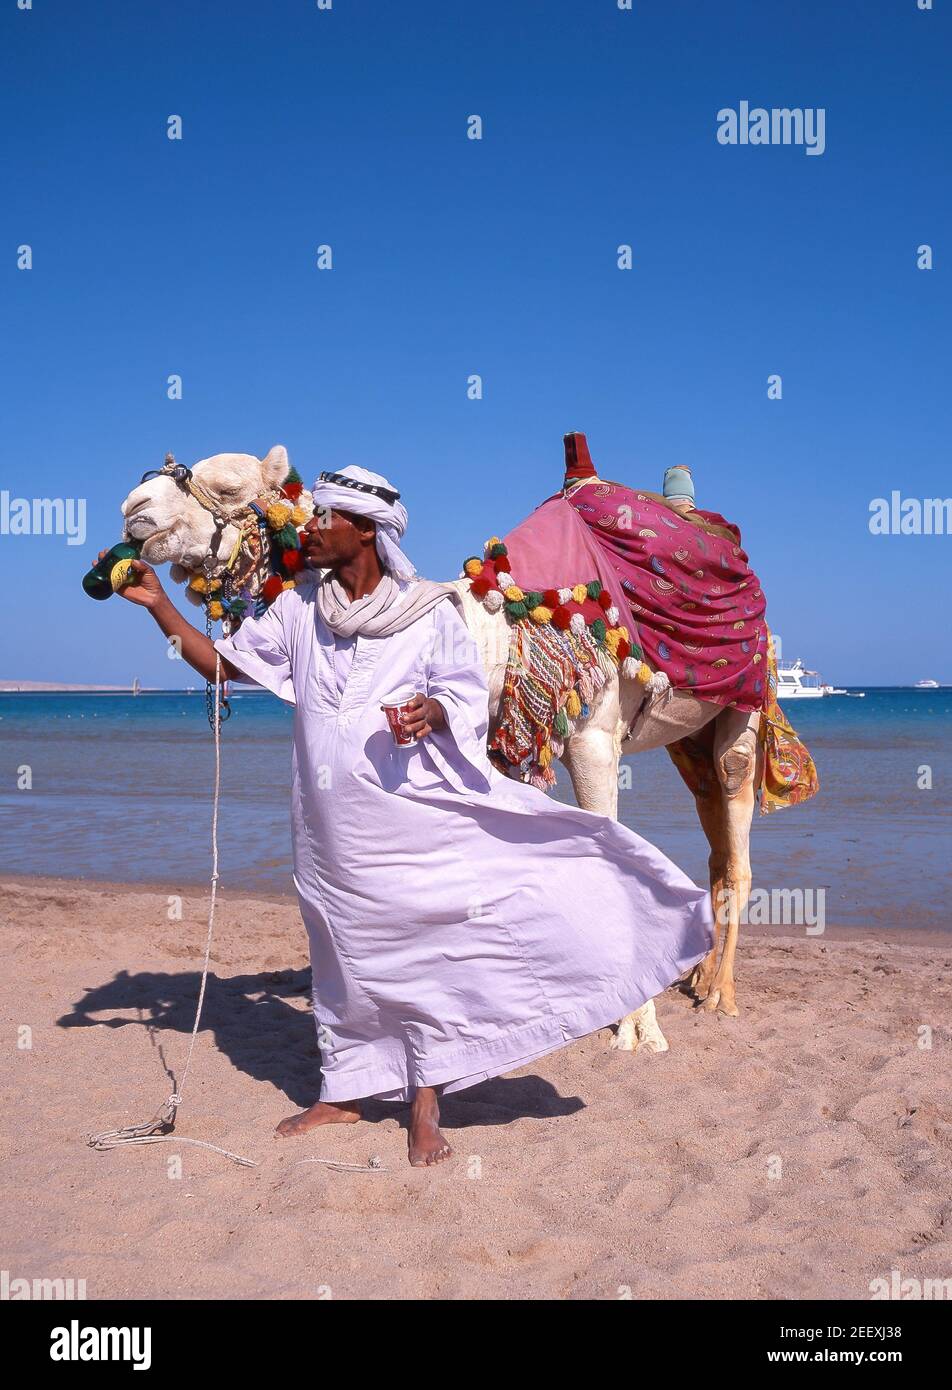 Camel driver with camel on beach, Hurghada, Republic of Egypt Stock Photo